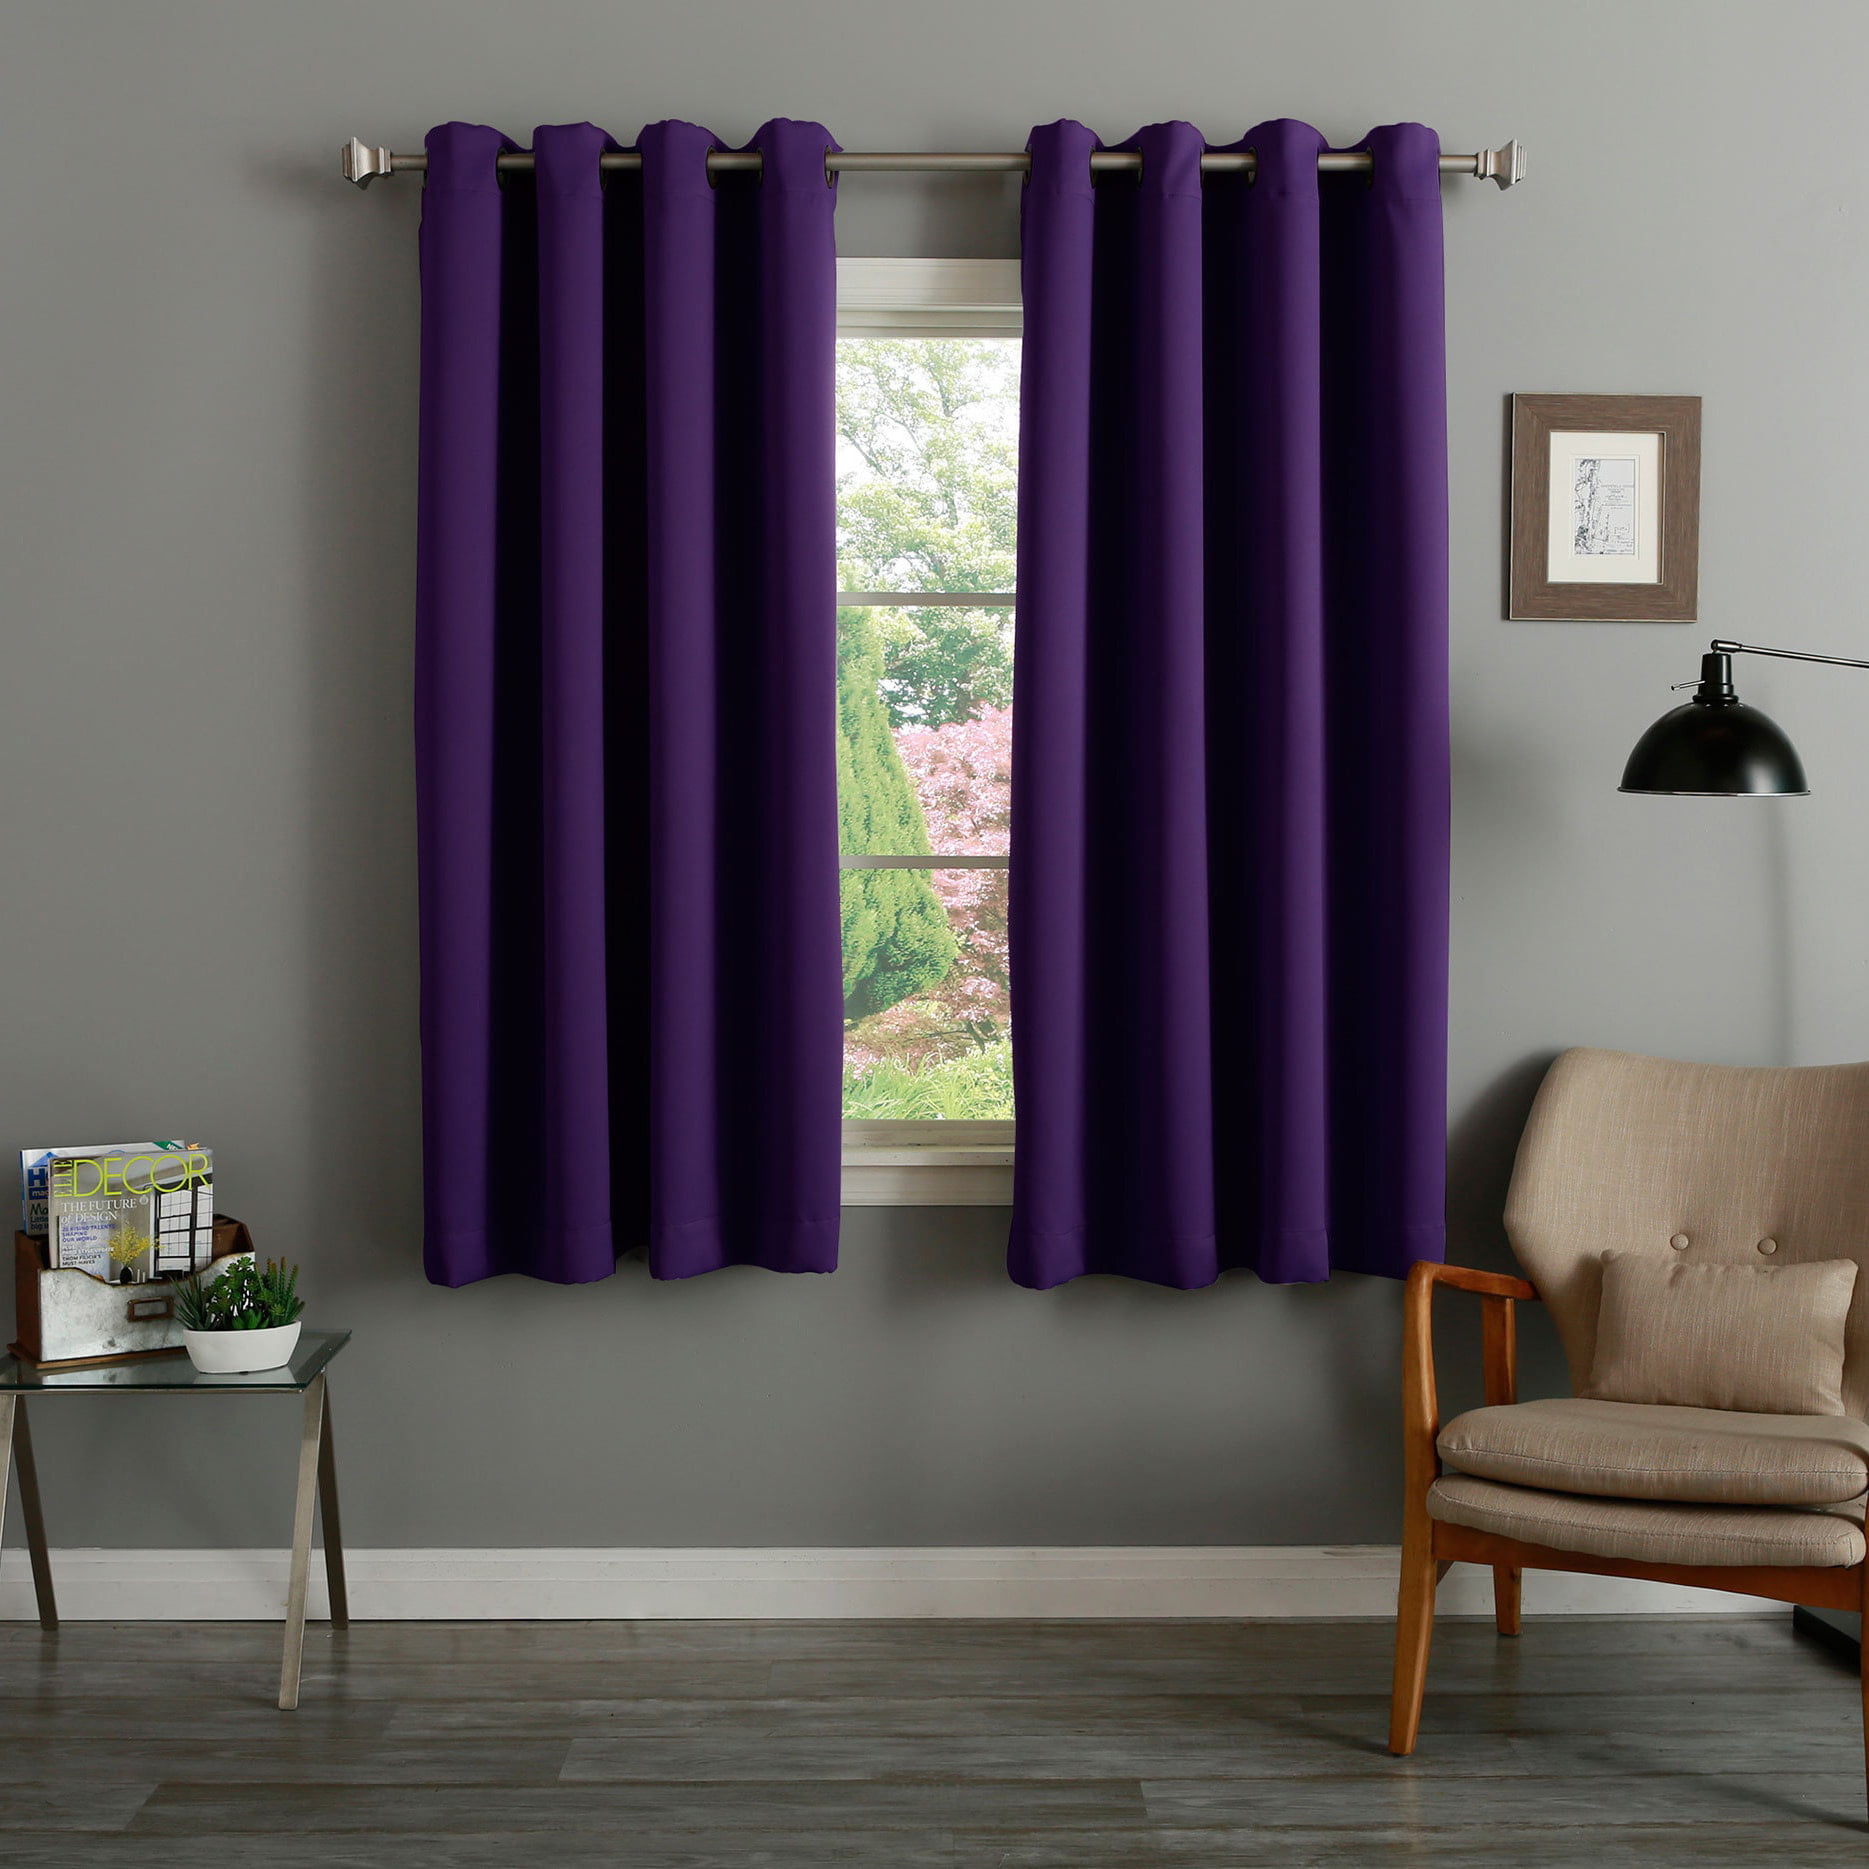 Aurora Home Grommet Top Thermal Insulated Blackout 64-inch Curtain